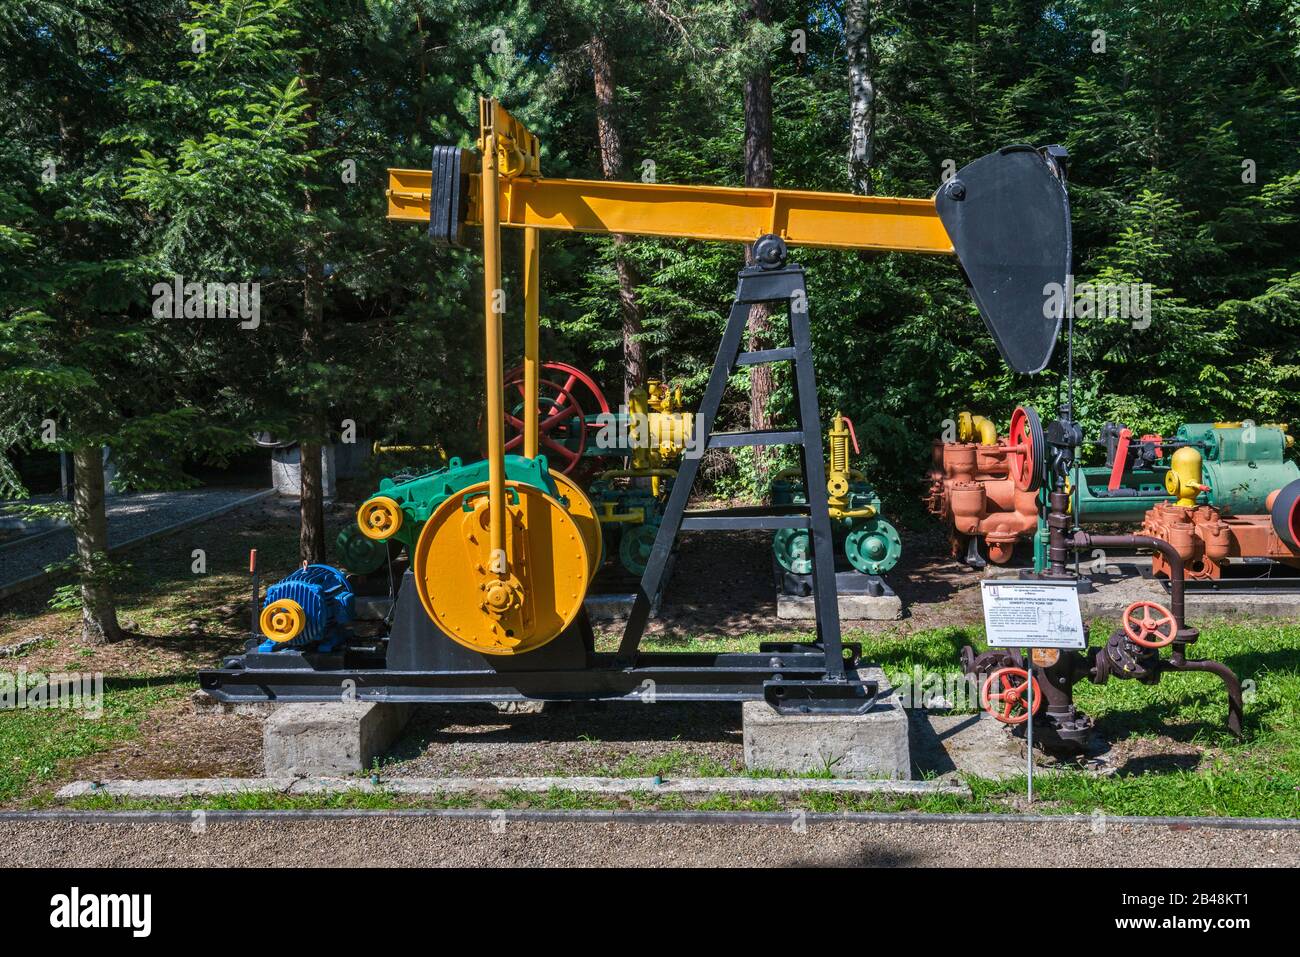 Konik 1000, oil well pump jack, the most popular in Poland, Ignacy Lukasiewicz Museum of Oil and Gas Industry in Bobrka, Malopolska, Poland Stock Photo